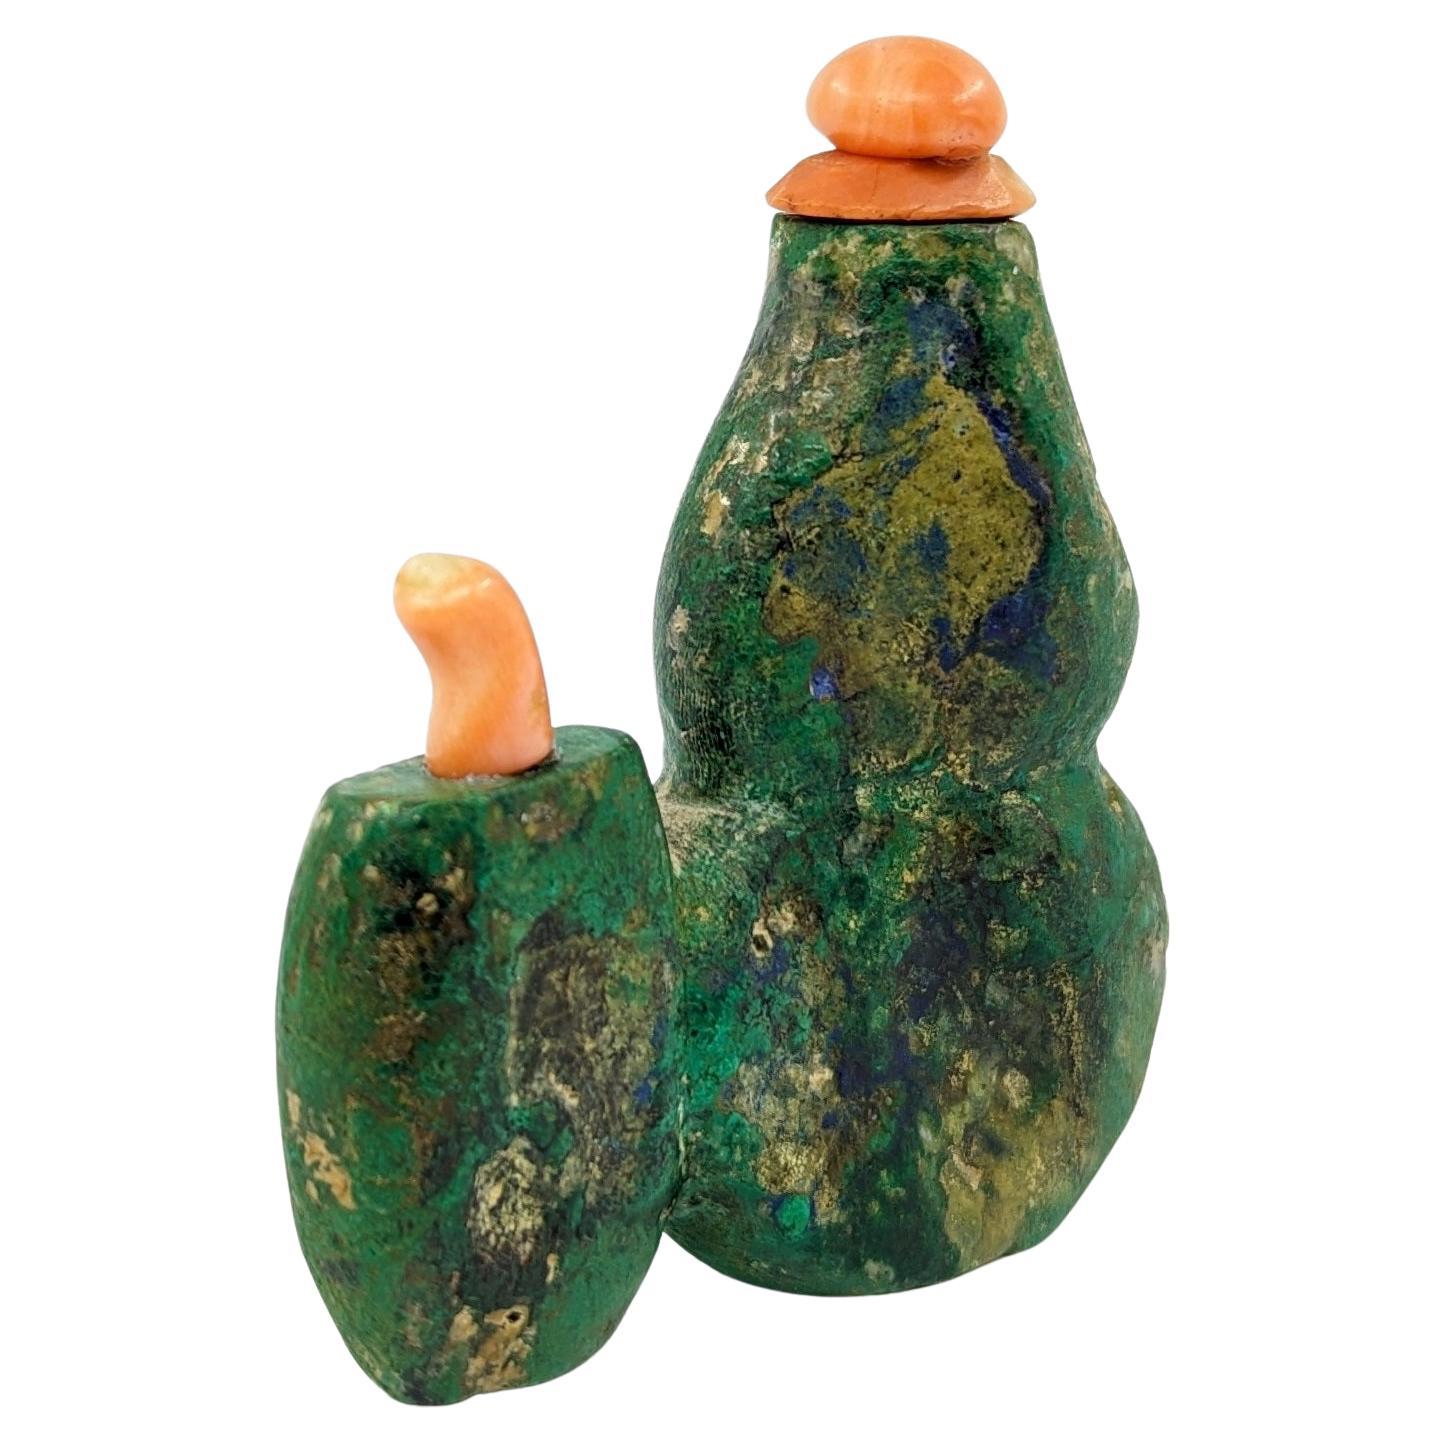 19th Century Rare Antique Chinese Azurite Malachite Double Snuff Bottle 19c Qing Dynasty For Sale